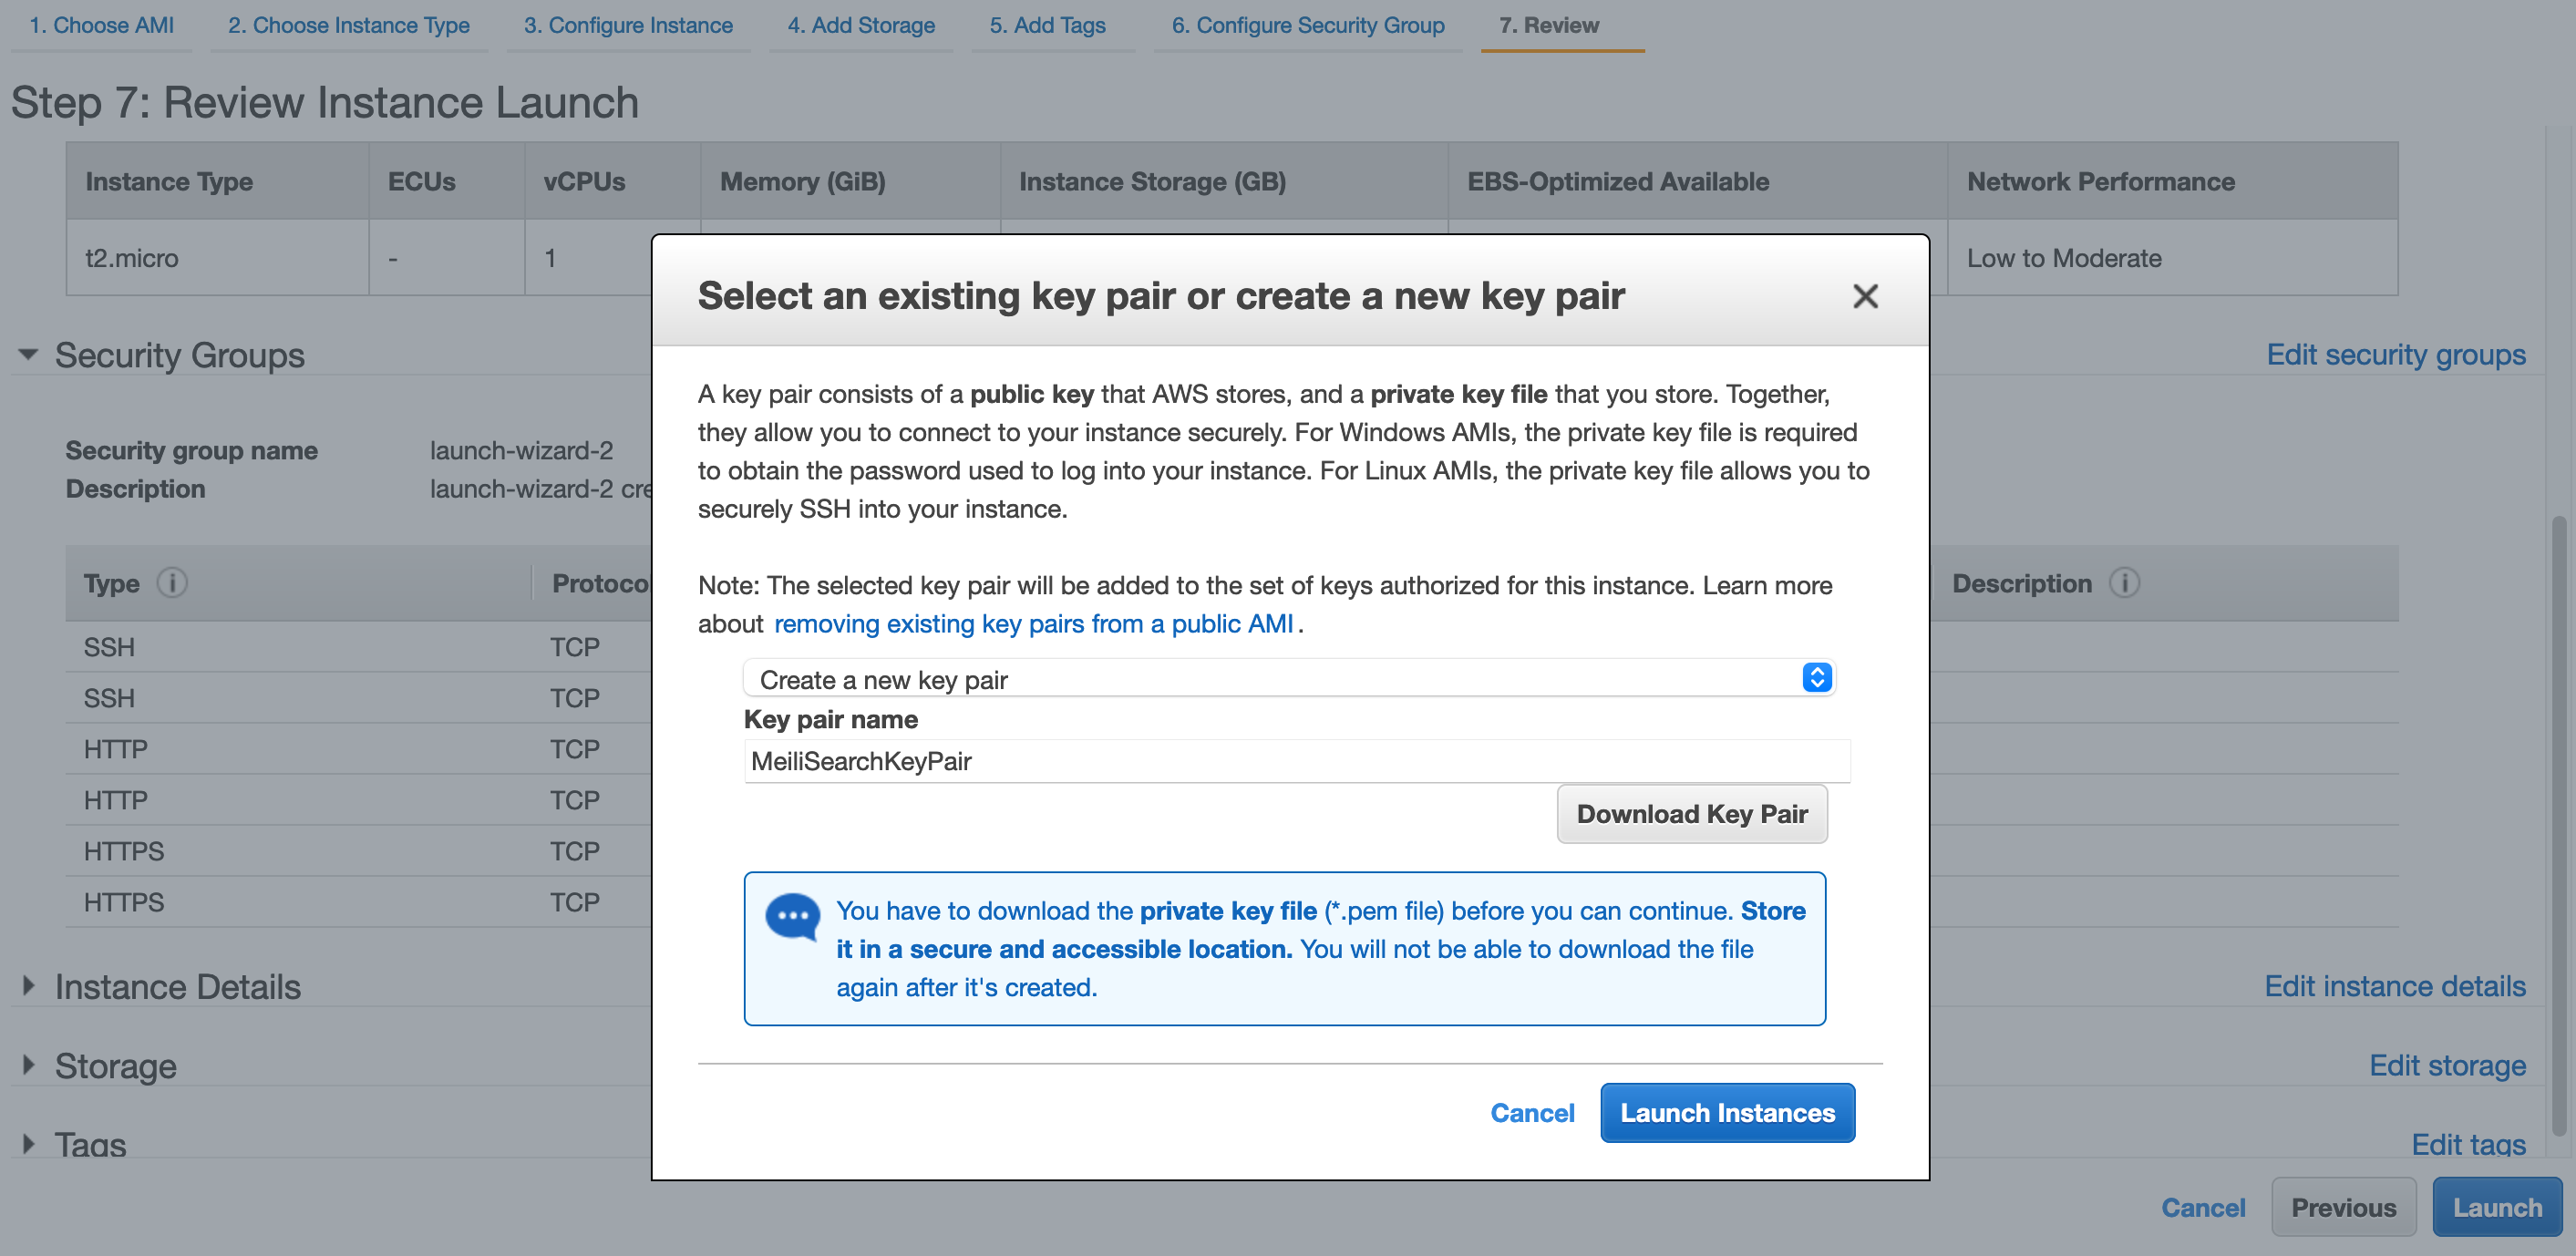 A popup titled: "Select an existing key pair or create a new key pair". Inside the popup, there is a form that allows you to configure key pairs. It also contains a warning: "Download and store your private key file in a secure accessible location. You cannot download it again once it has been created"